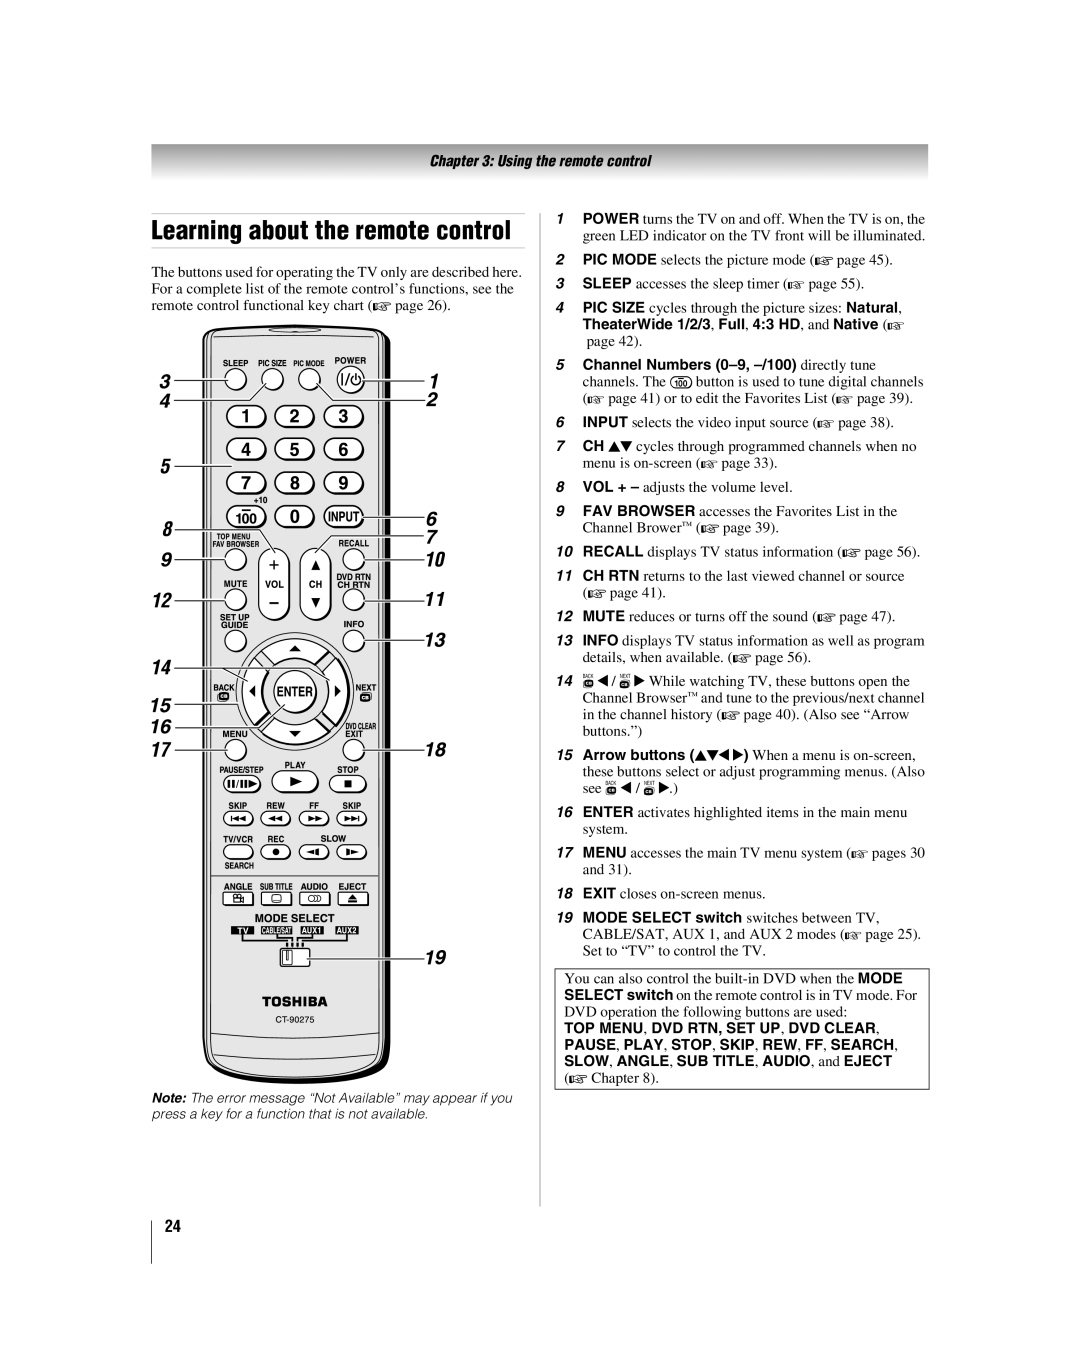 Toshiba 32LV67U, 26LV67 Learning about the remote control, Using the remote control, Top Menu, Dvd Rtn, Set Up, Dvd Clear 